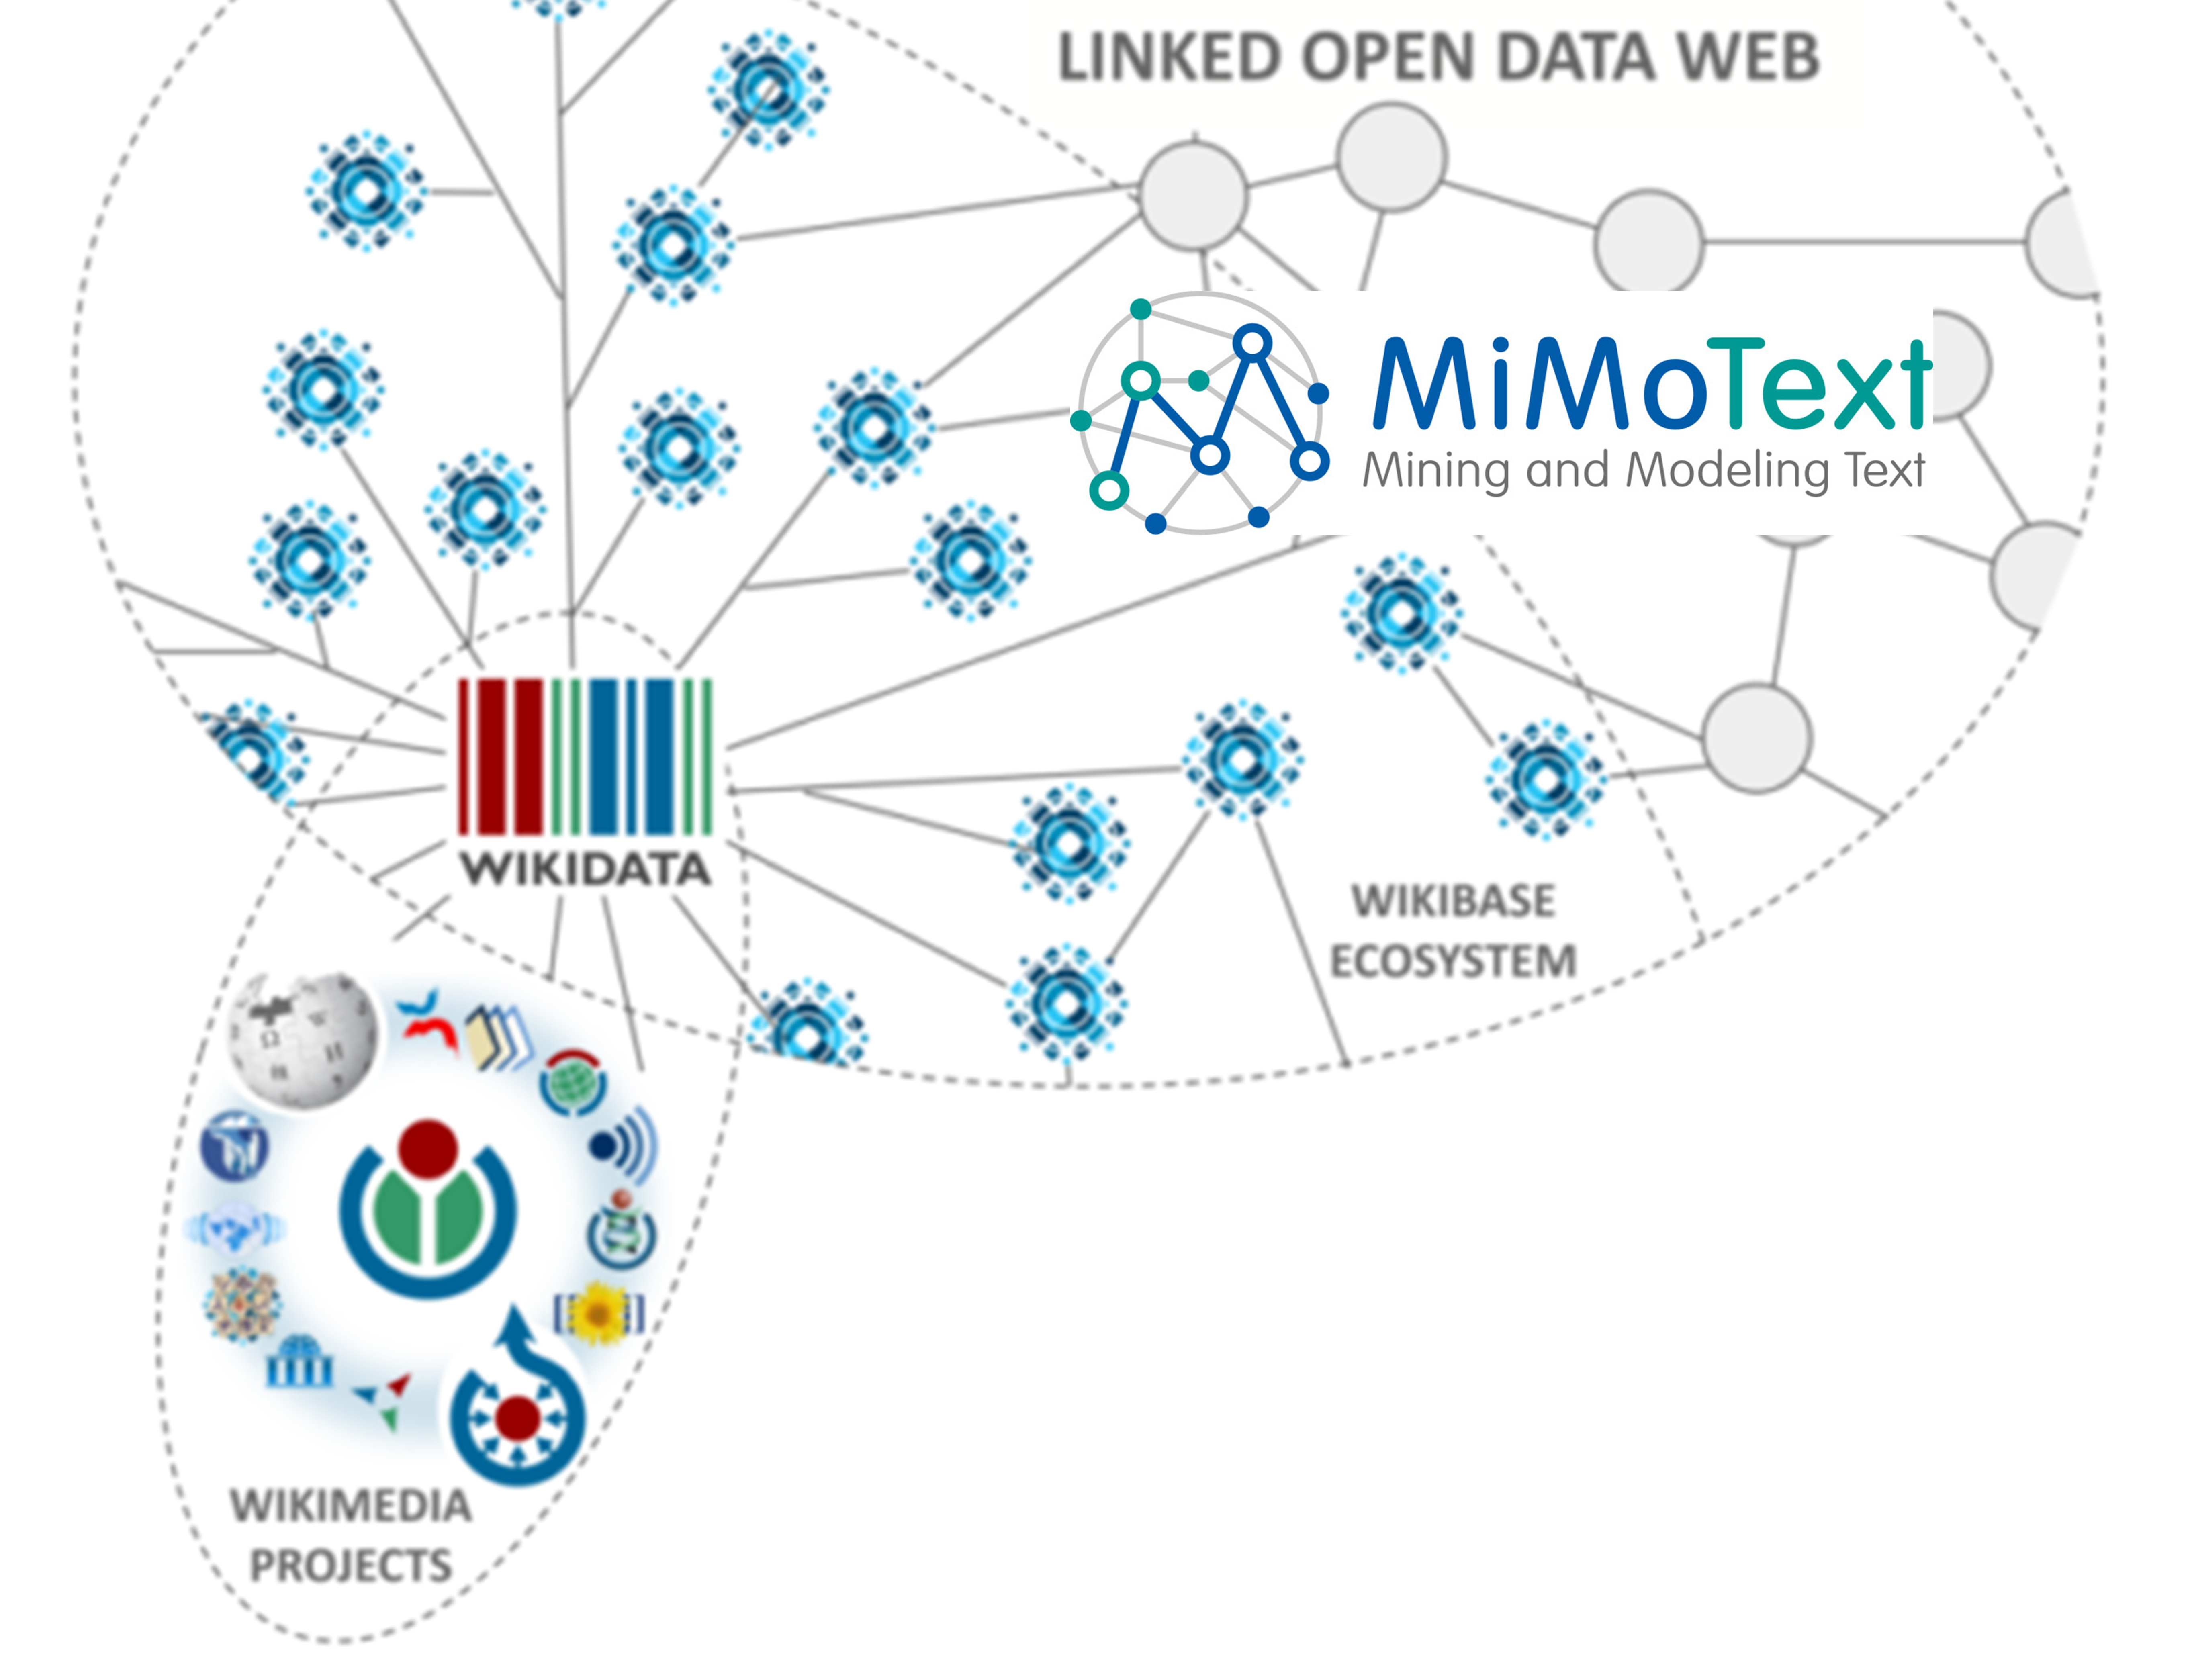 A view of the MiMoTextBase within the Wikimedia Linked Open Data web.